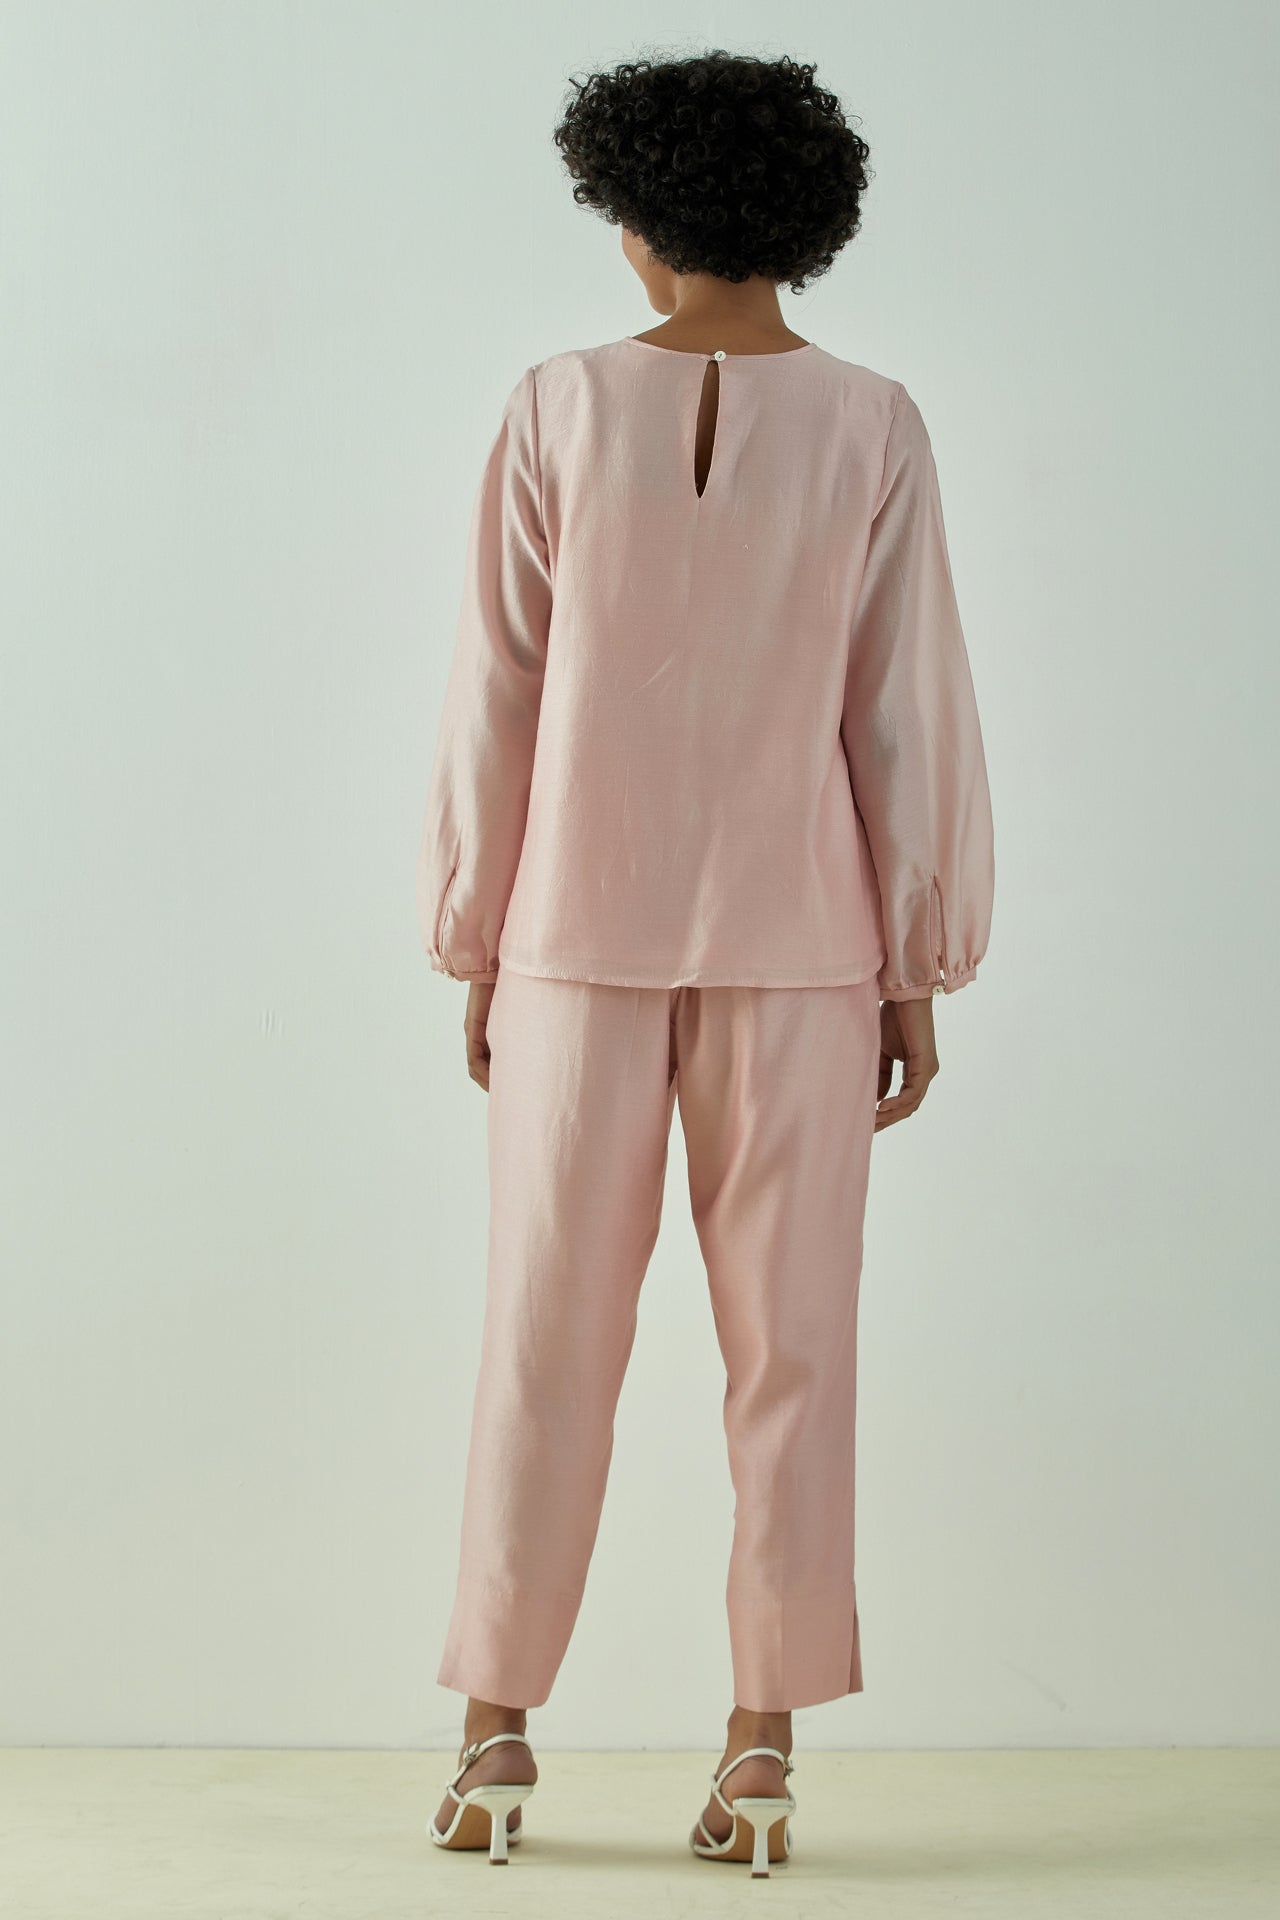 Miriam - Old Rose Demure Top with Ankle Pants